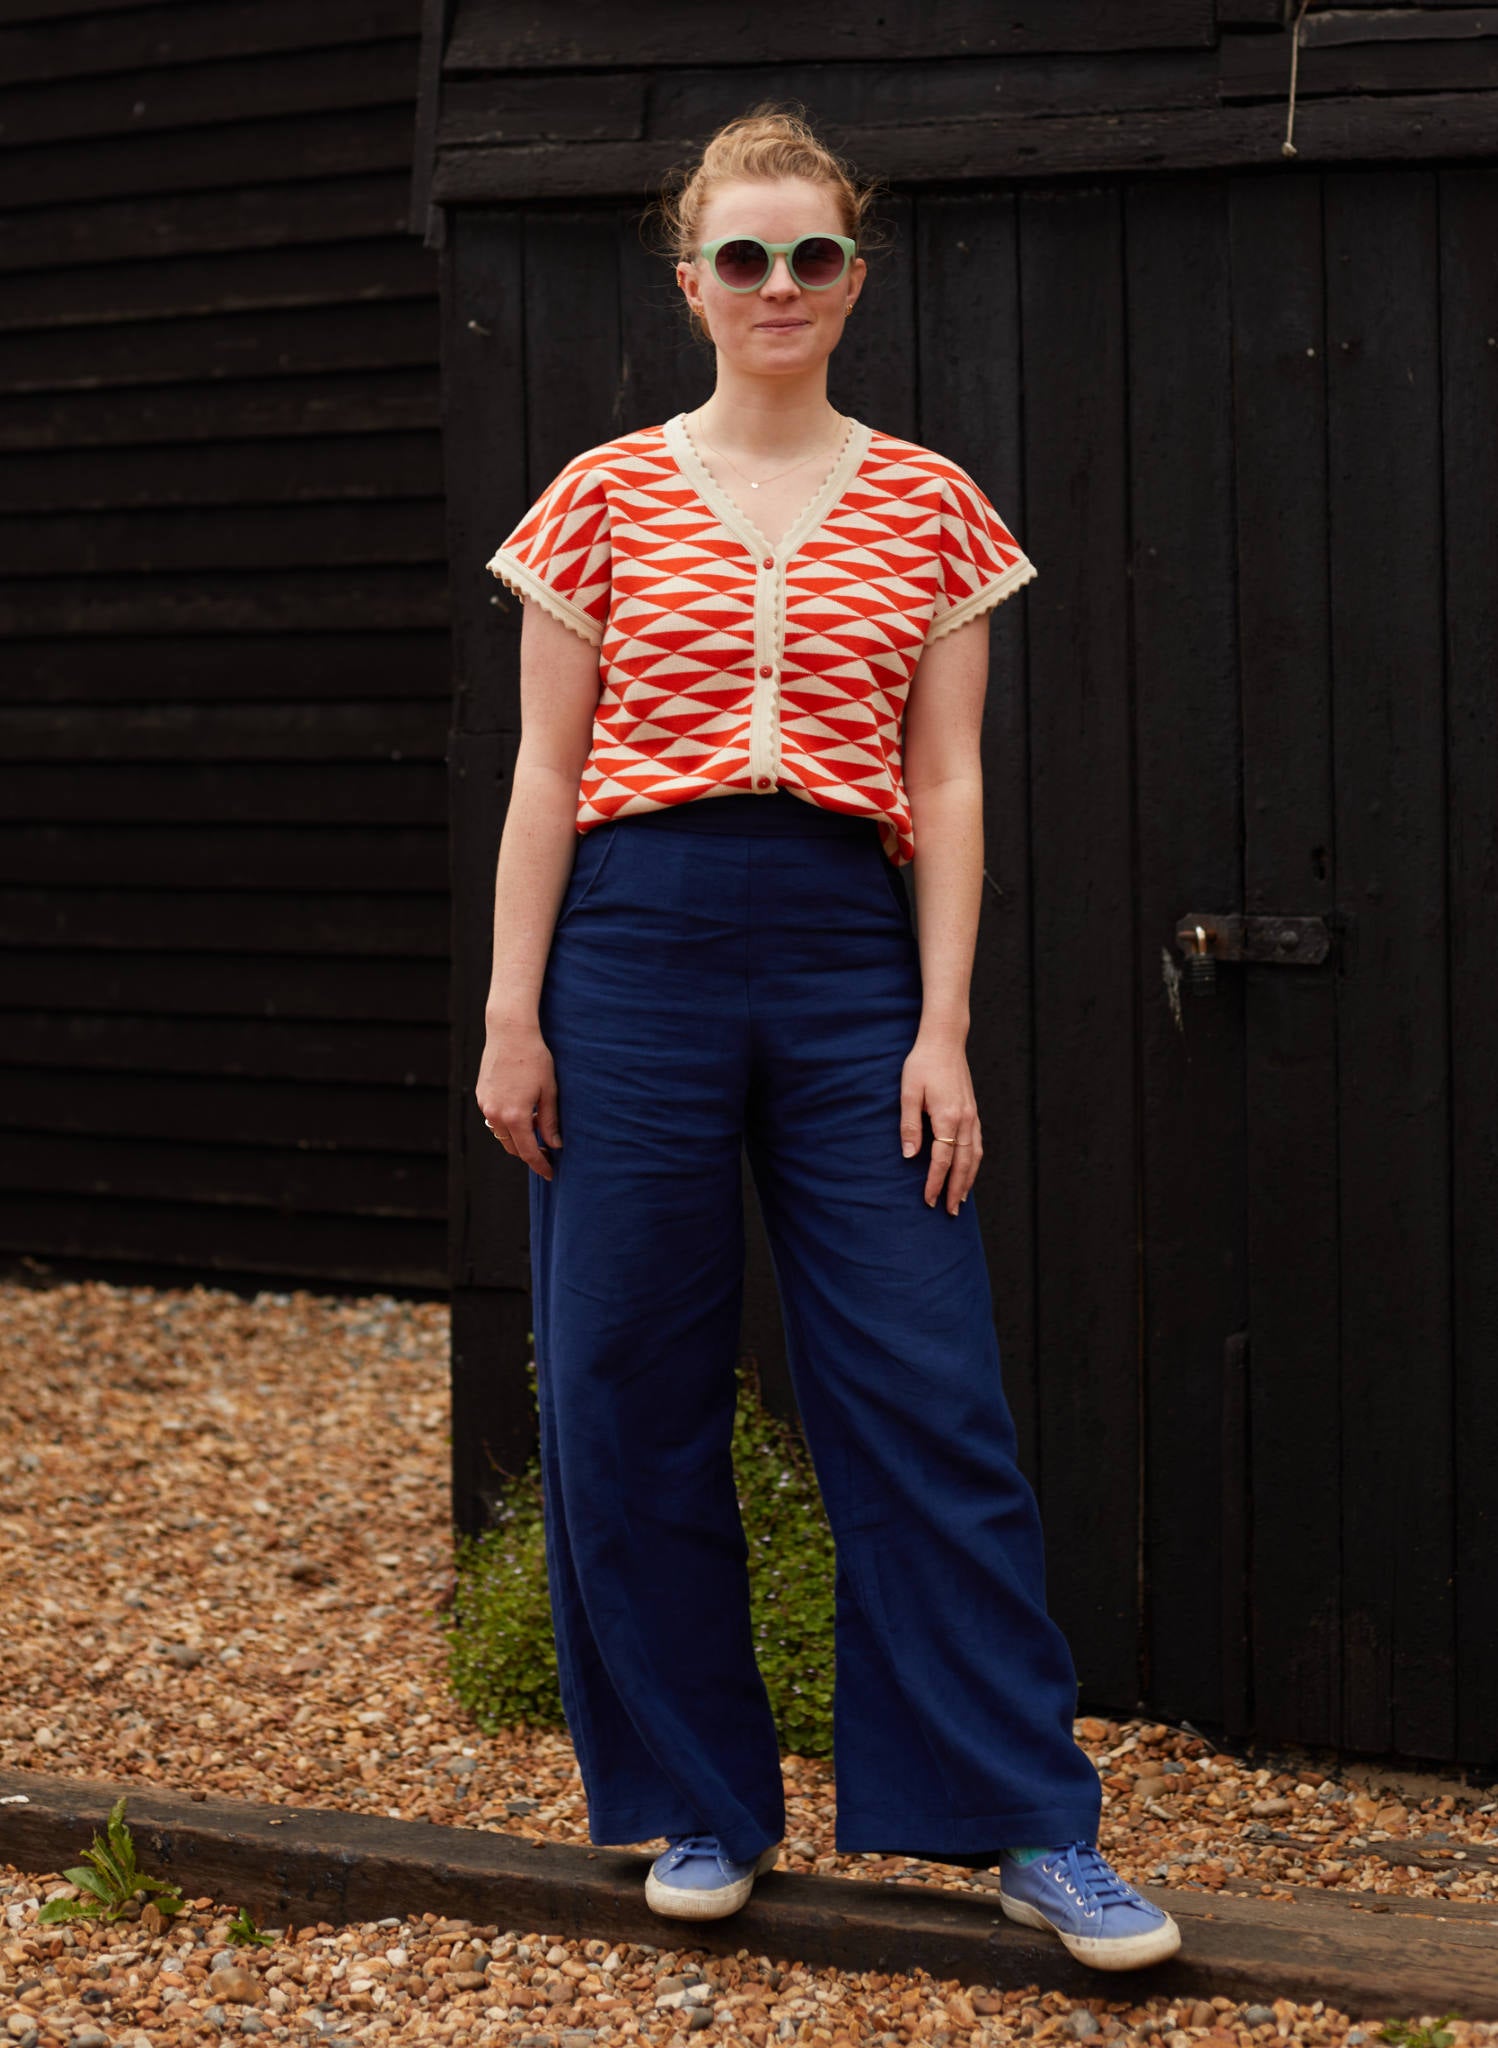 Emma - Red Sails - Knitted Top